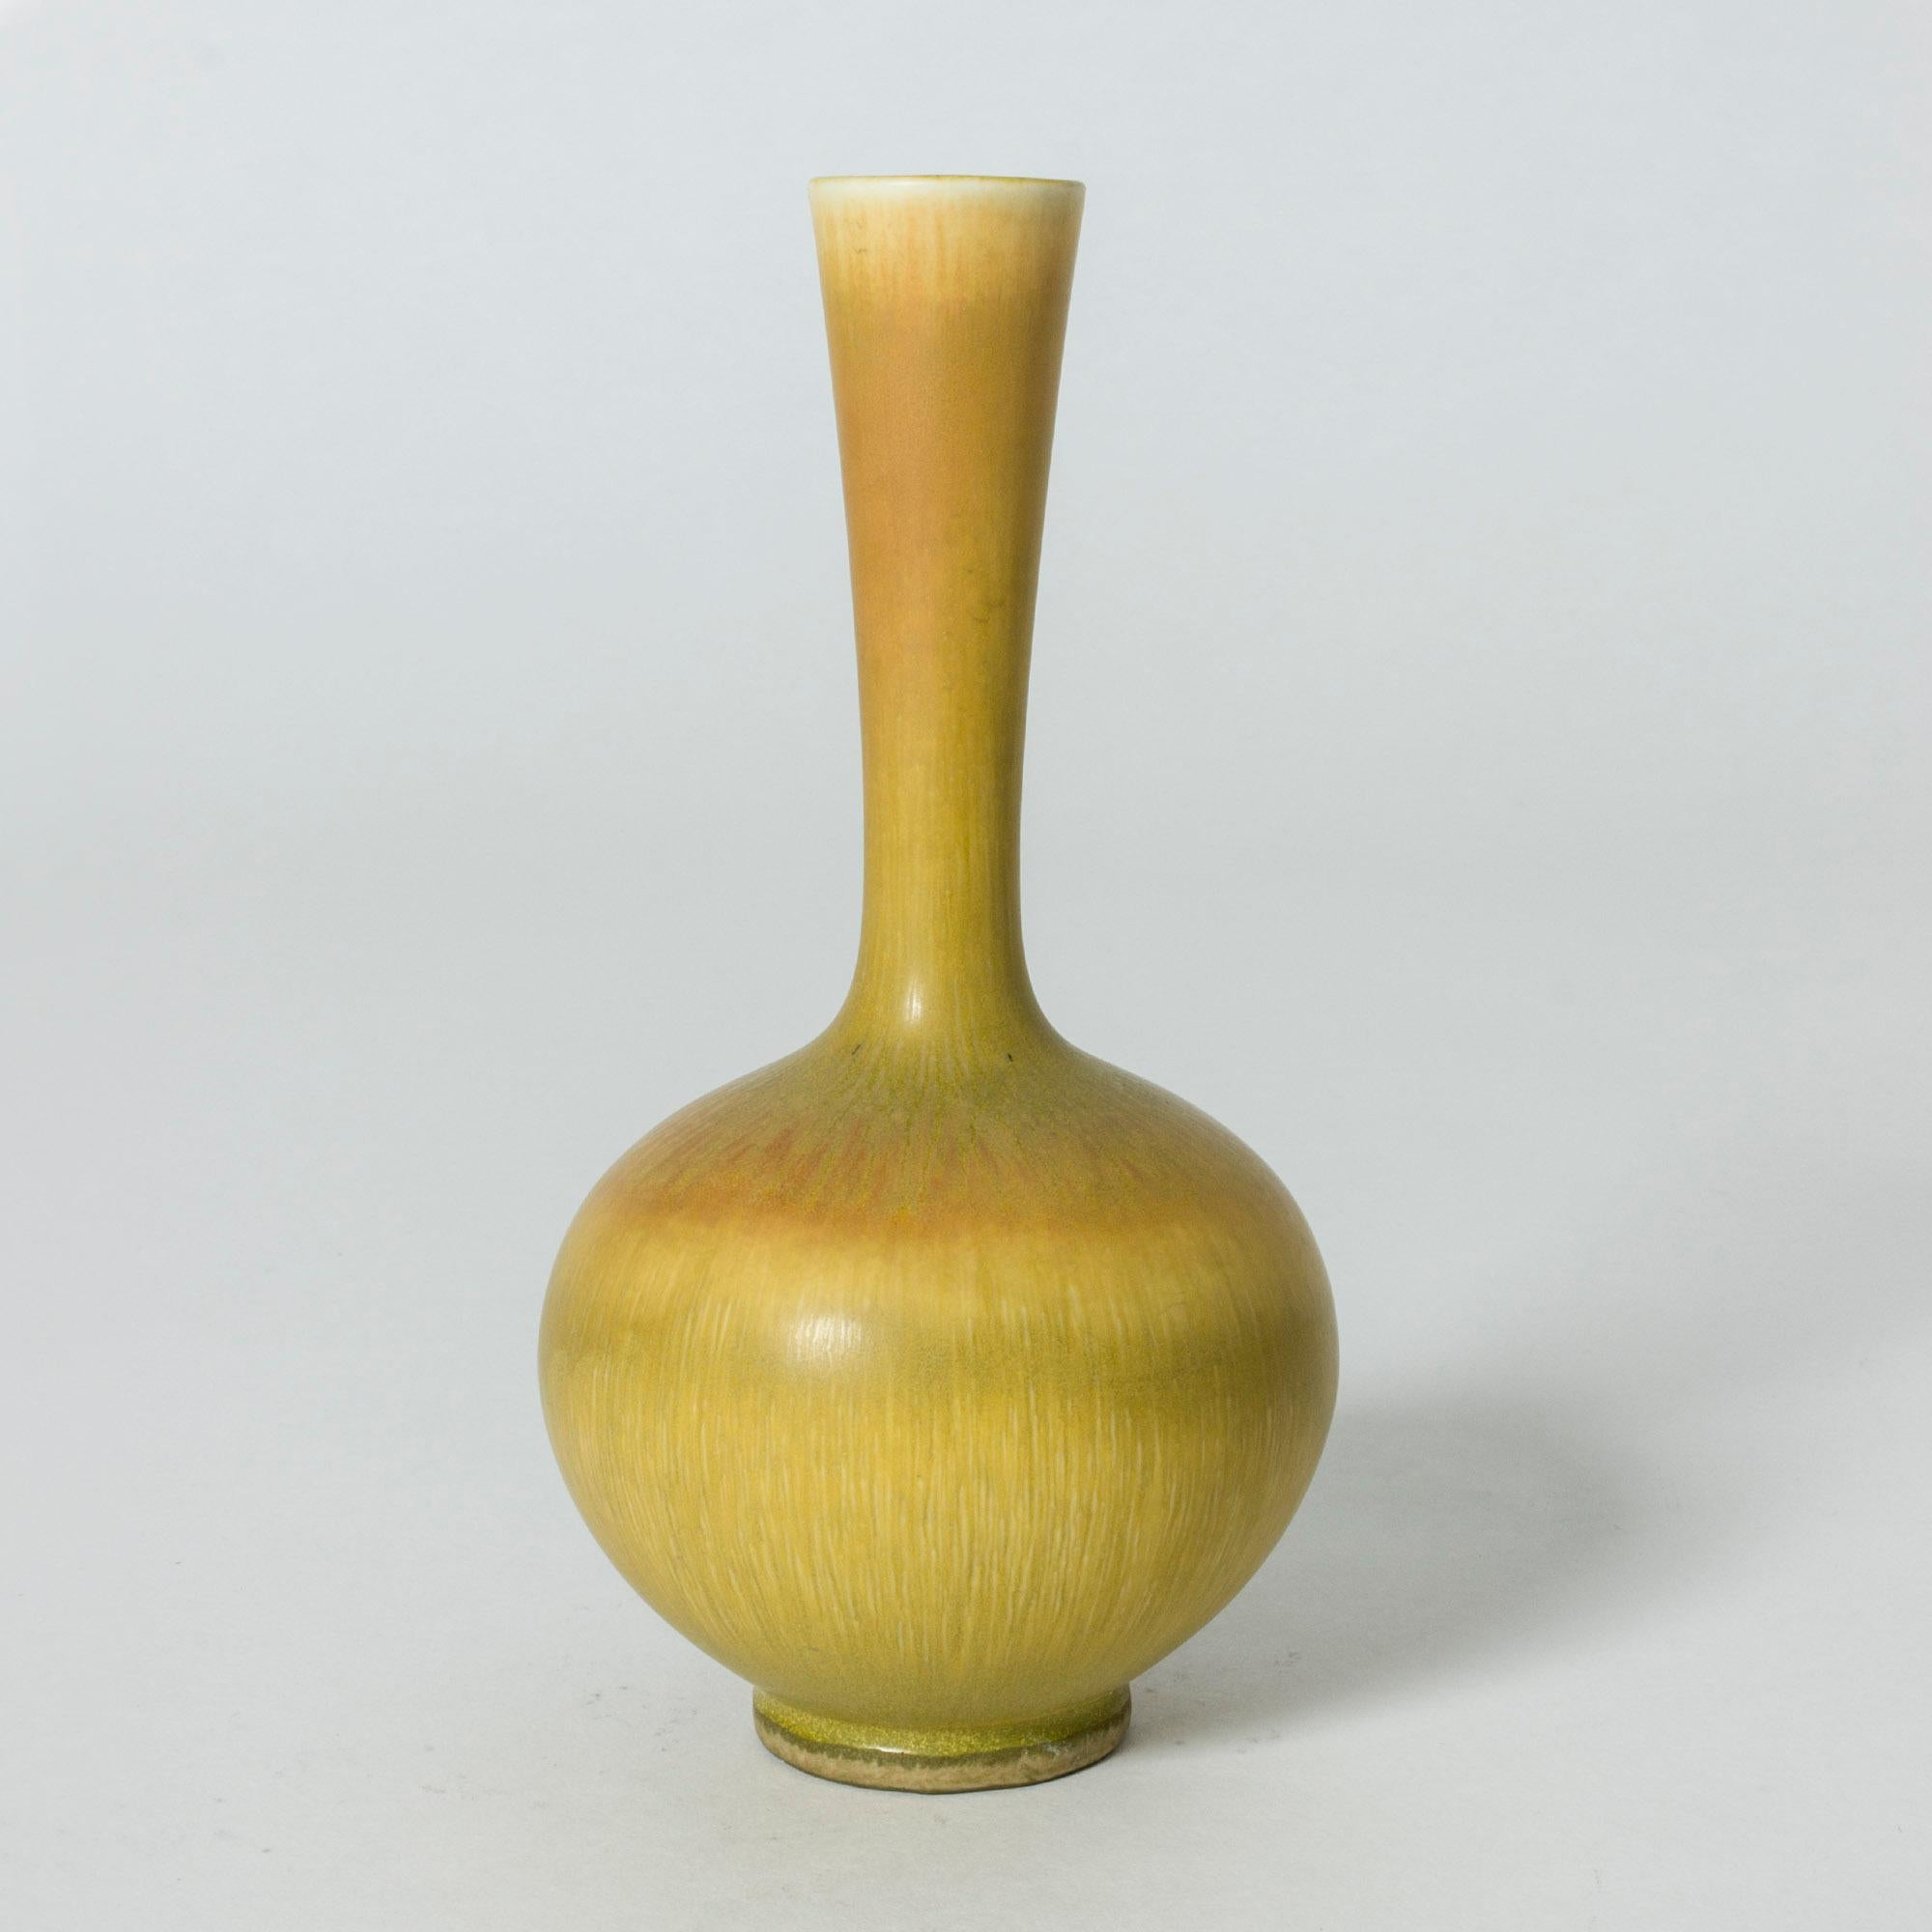 Elegant stoneware vase by Berndt Friberg, in a bulbous shape with a long neck. Warm yellow hare’s fur glaze.